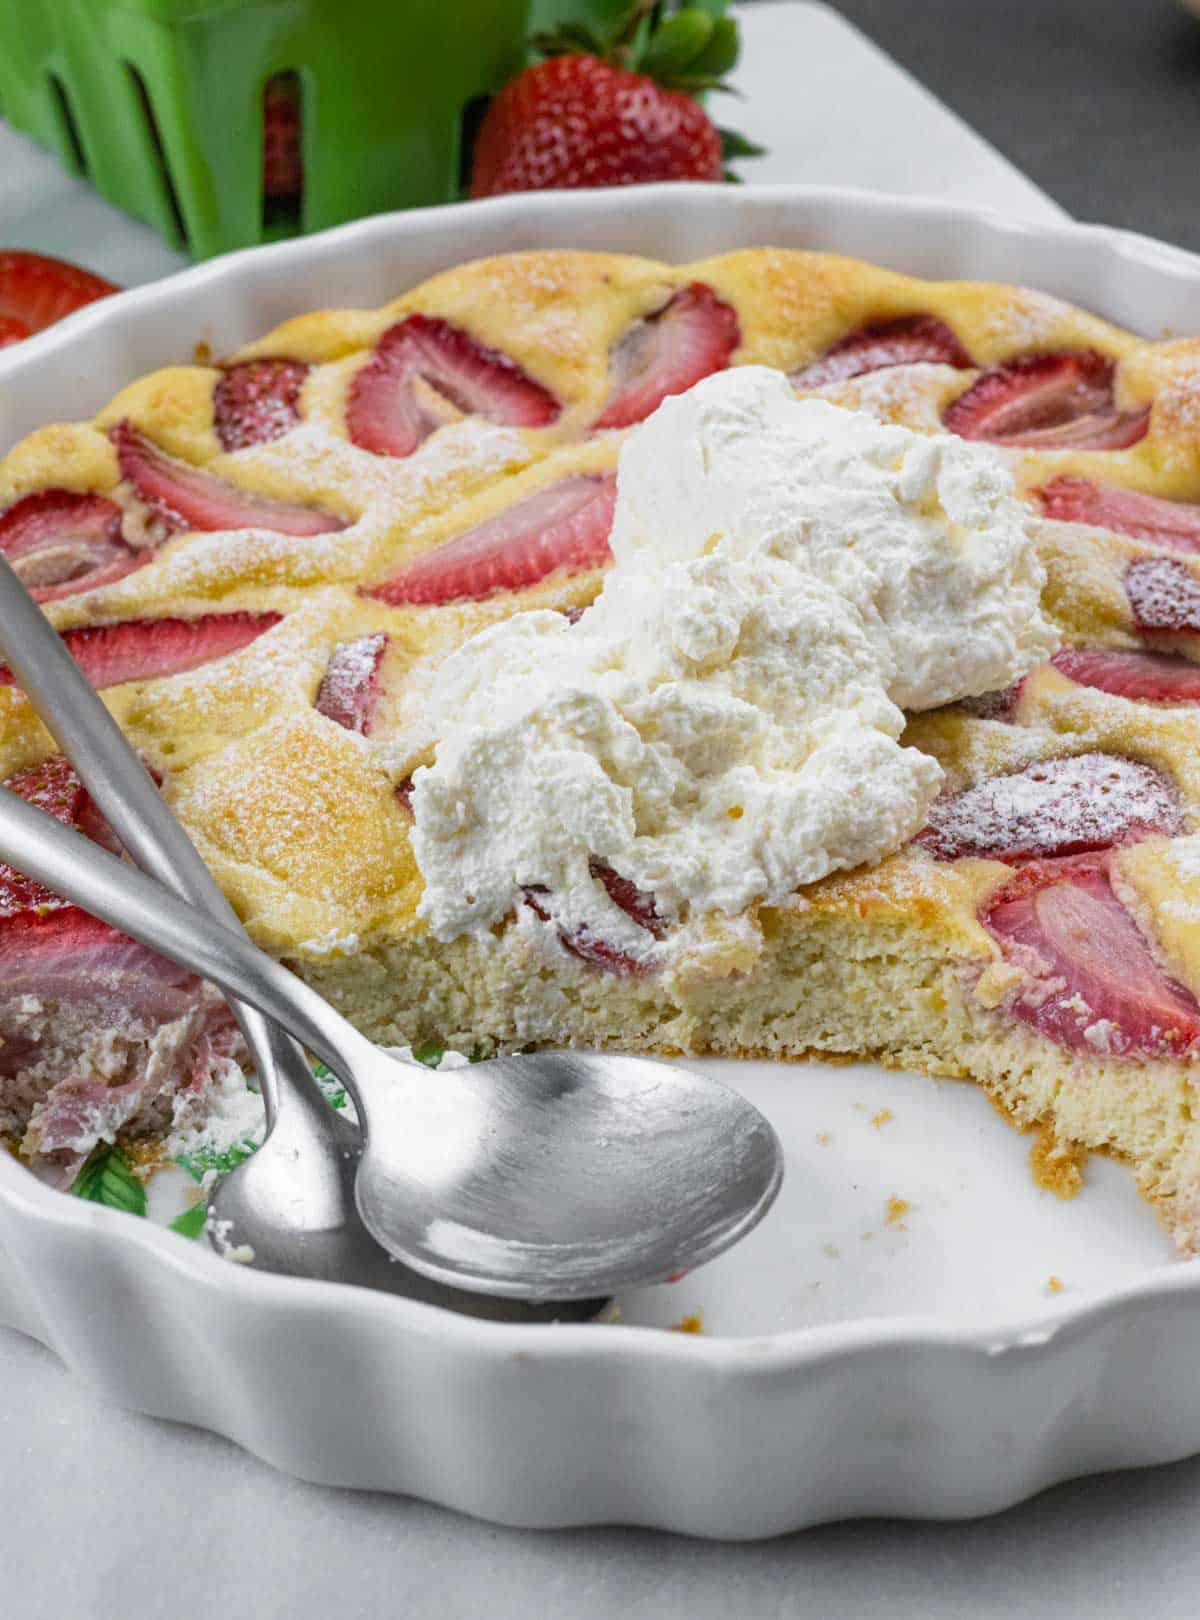 Berry clafoutis in tart dish topped with sugar-free whipped cream showing a serving removed and two spoons in the empty space.